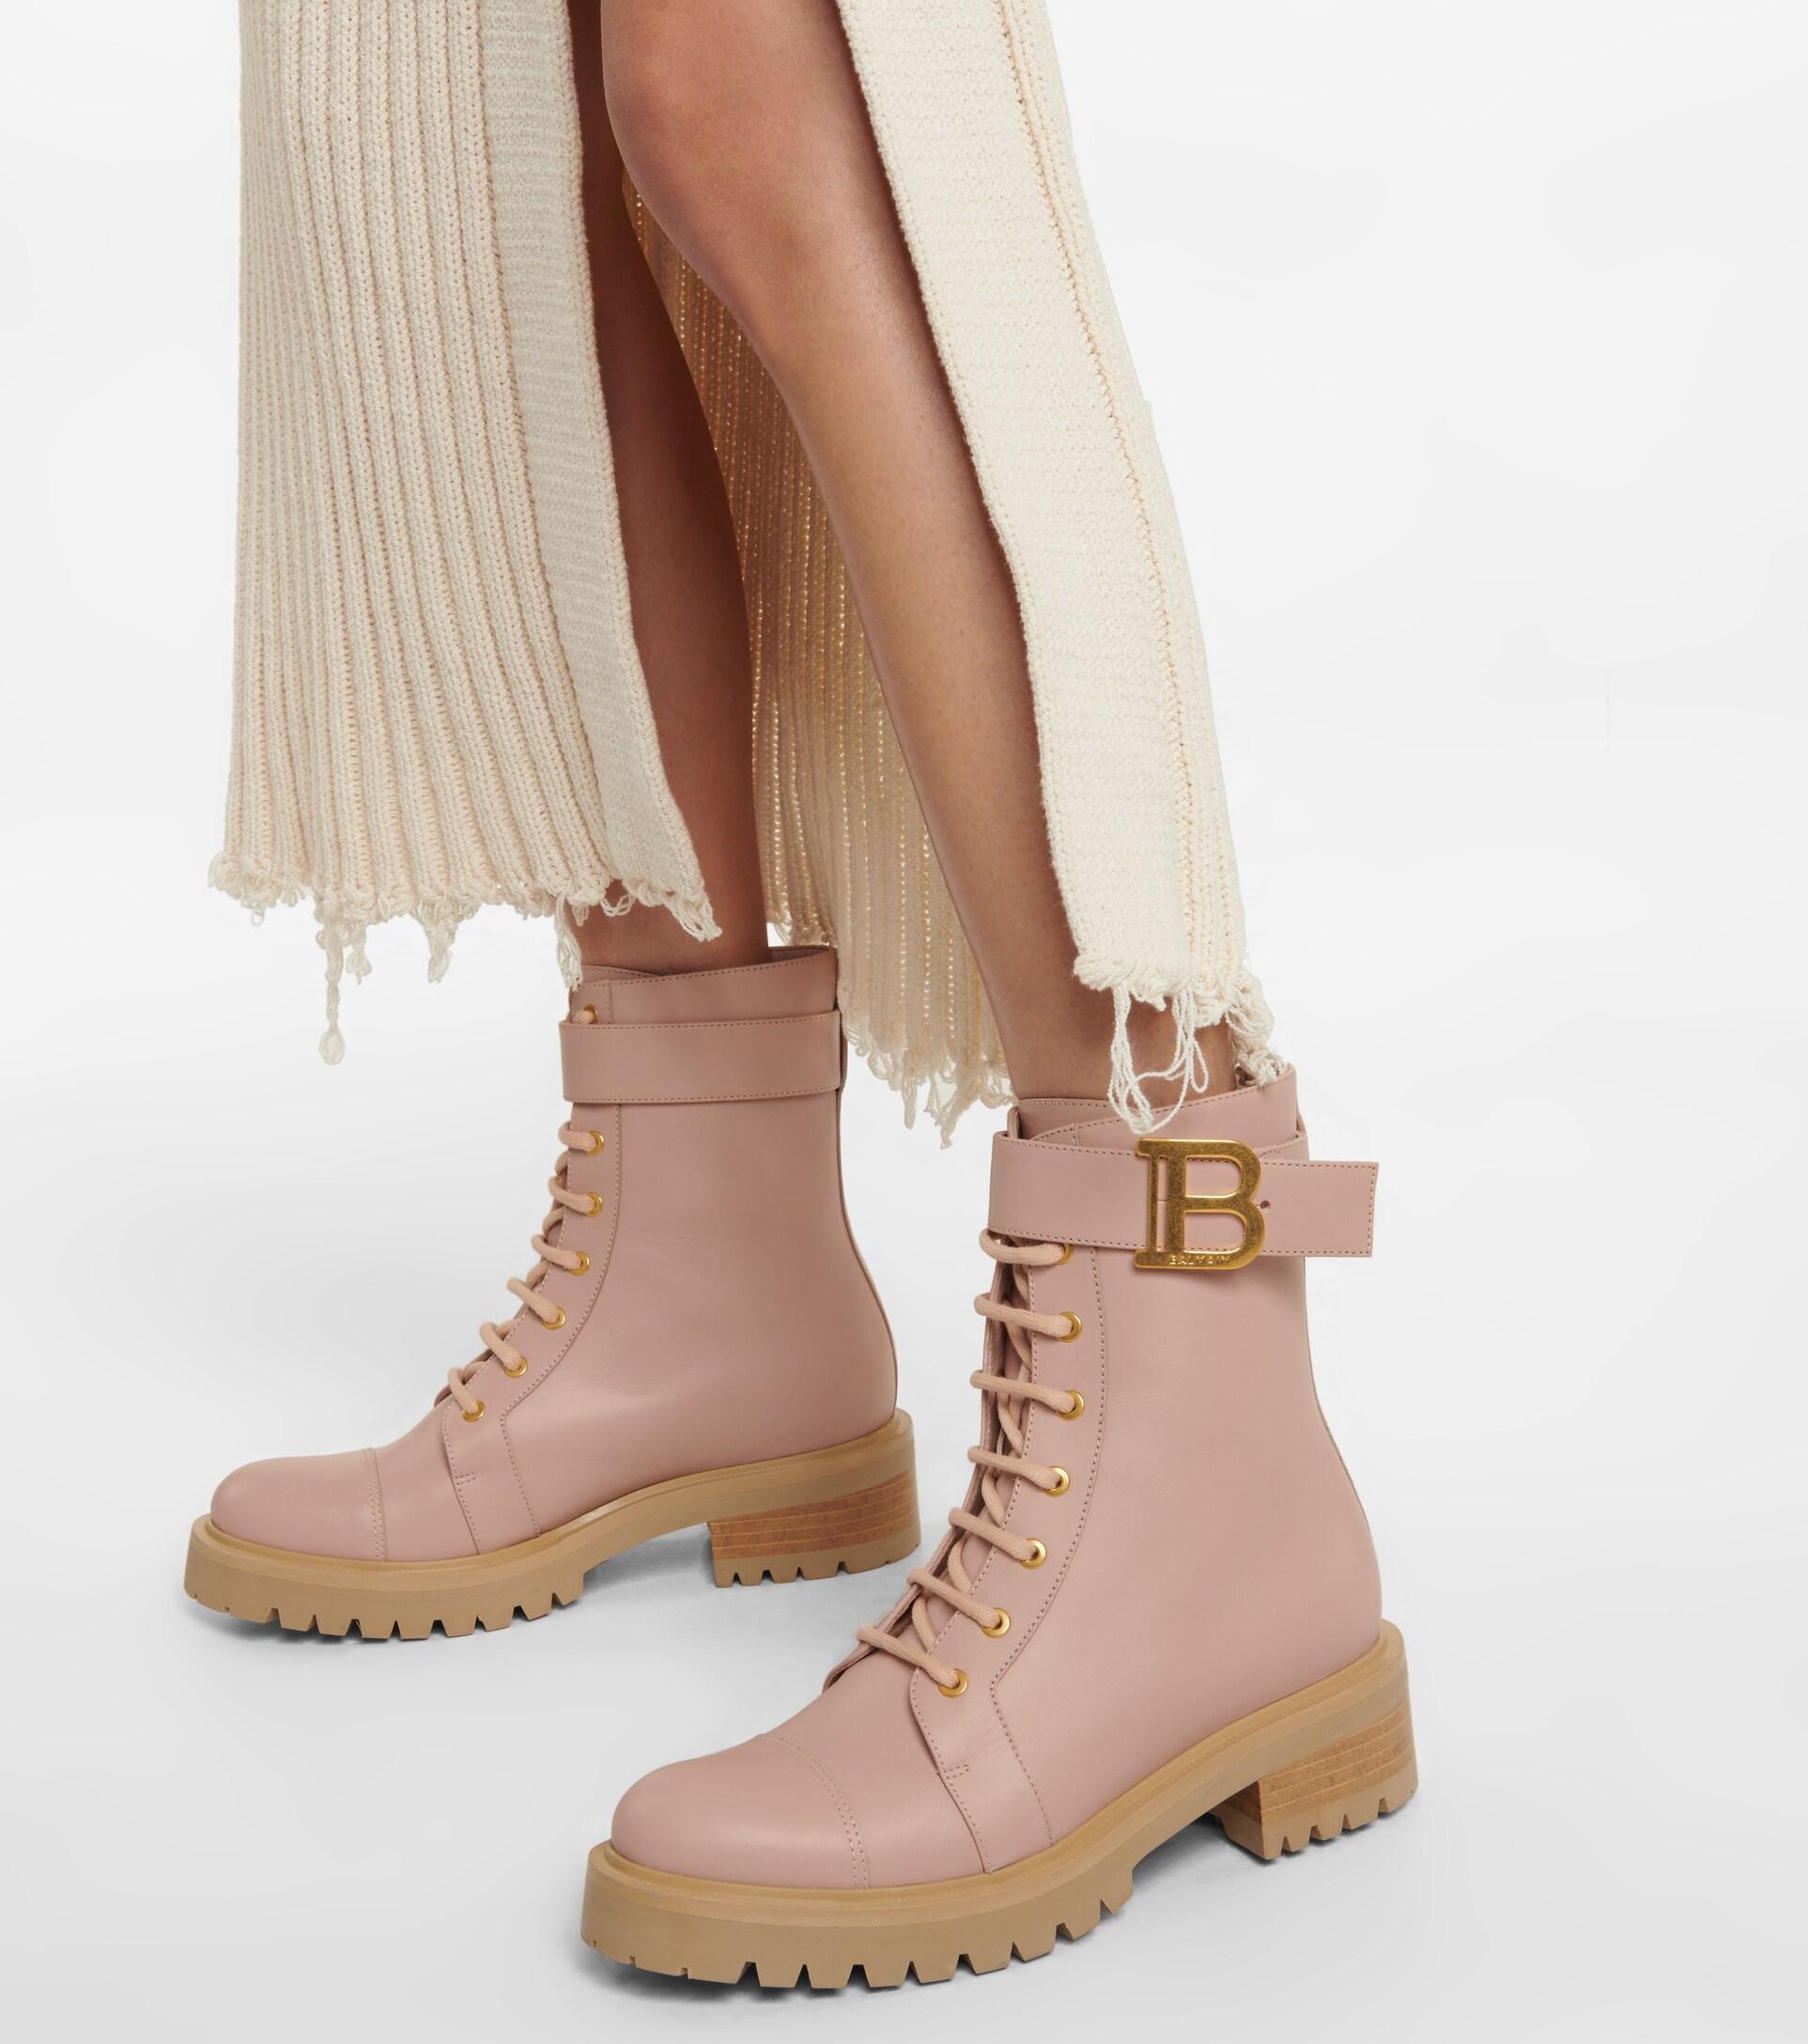 Balmain Ranger Leather Ankle Boots in Natural | Lyst